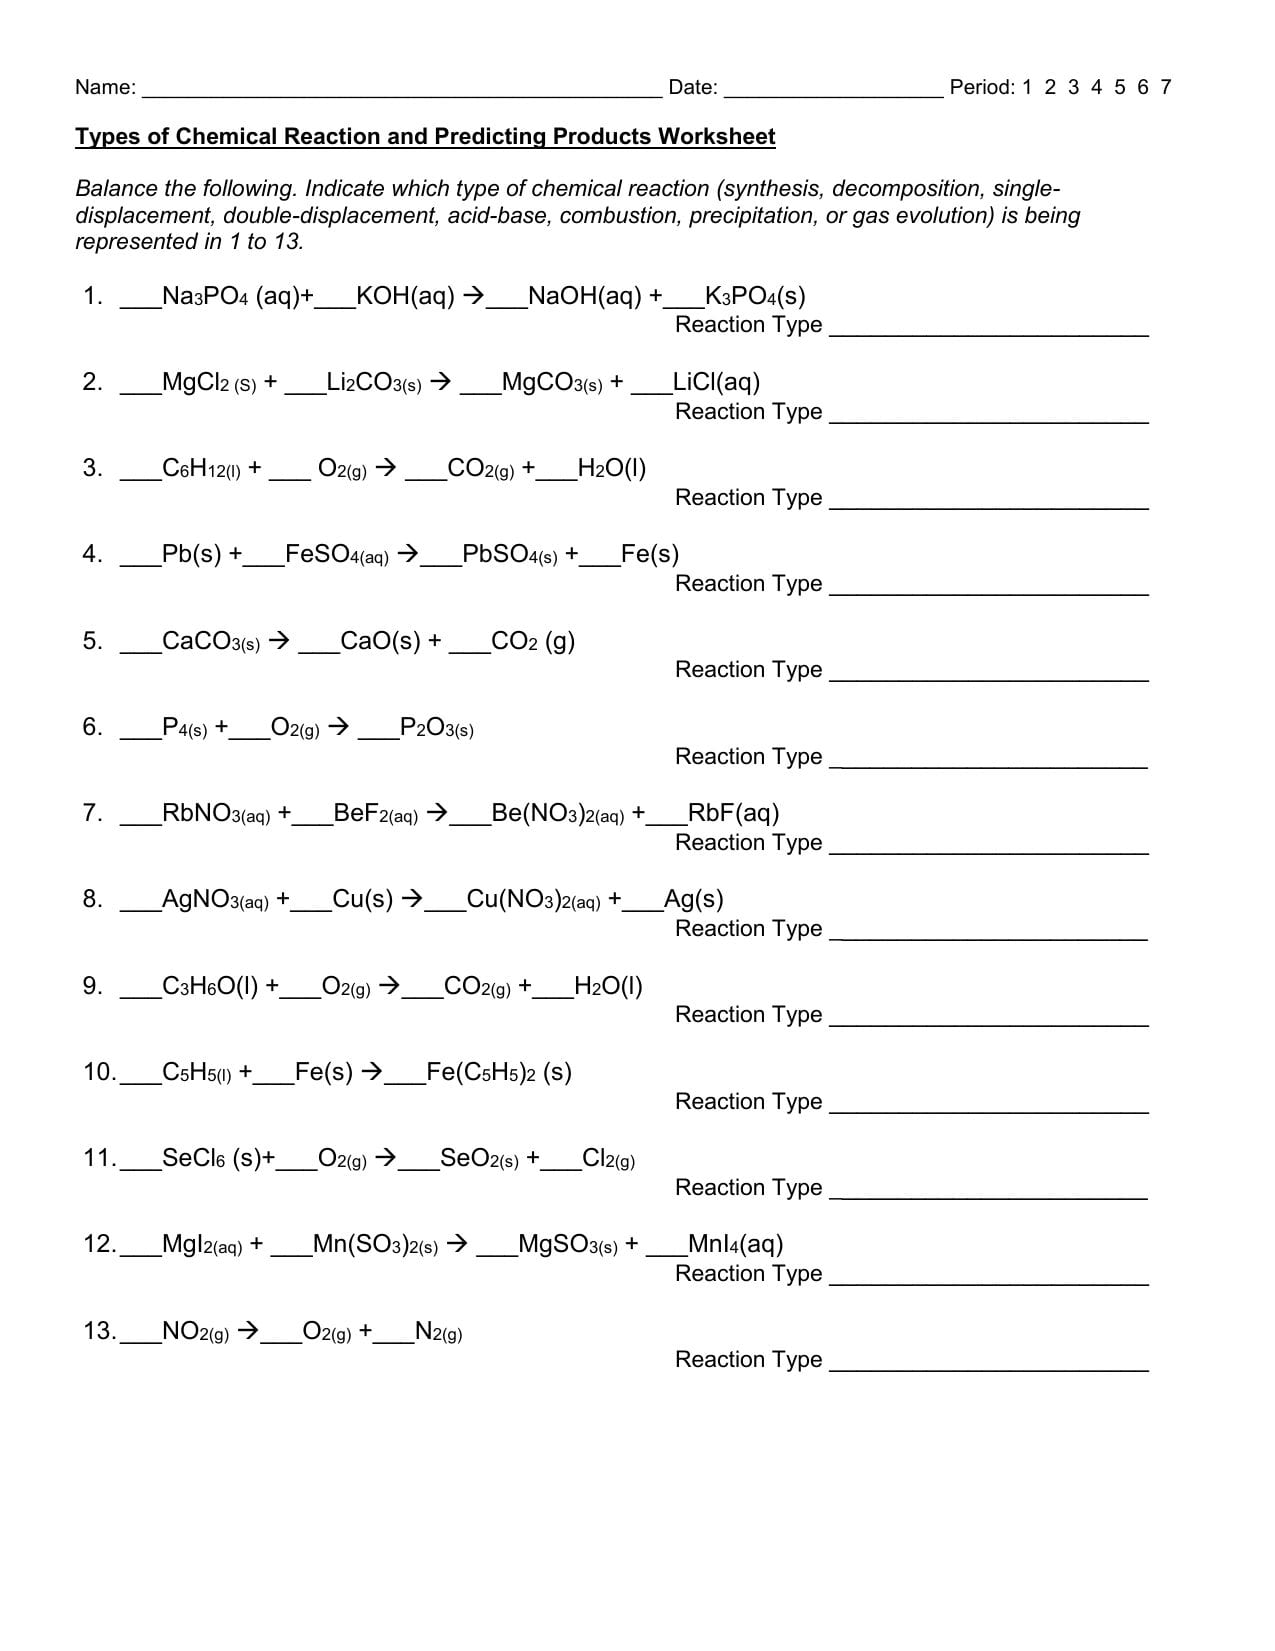 Types Of Chemical Reaction And Predicting Products Worksheet Regarding Predicting Products Worksheet Chemistry